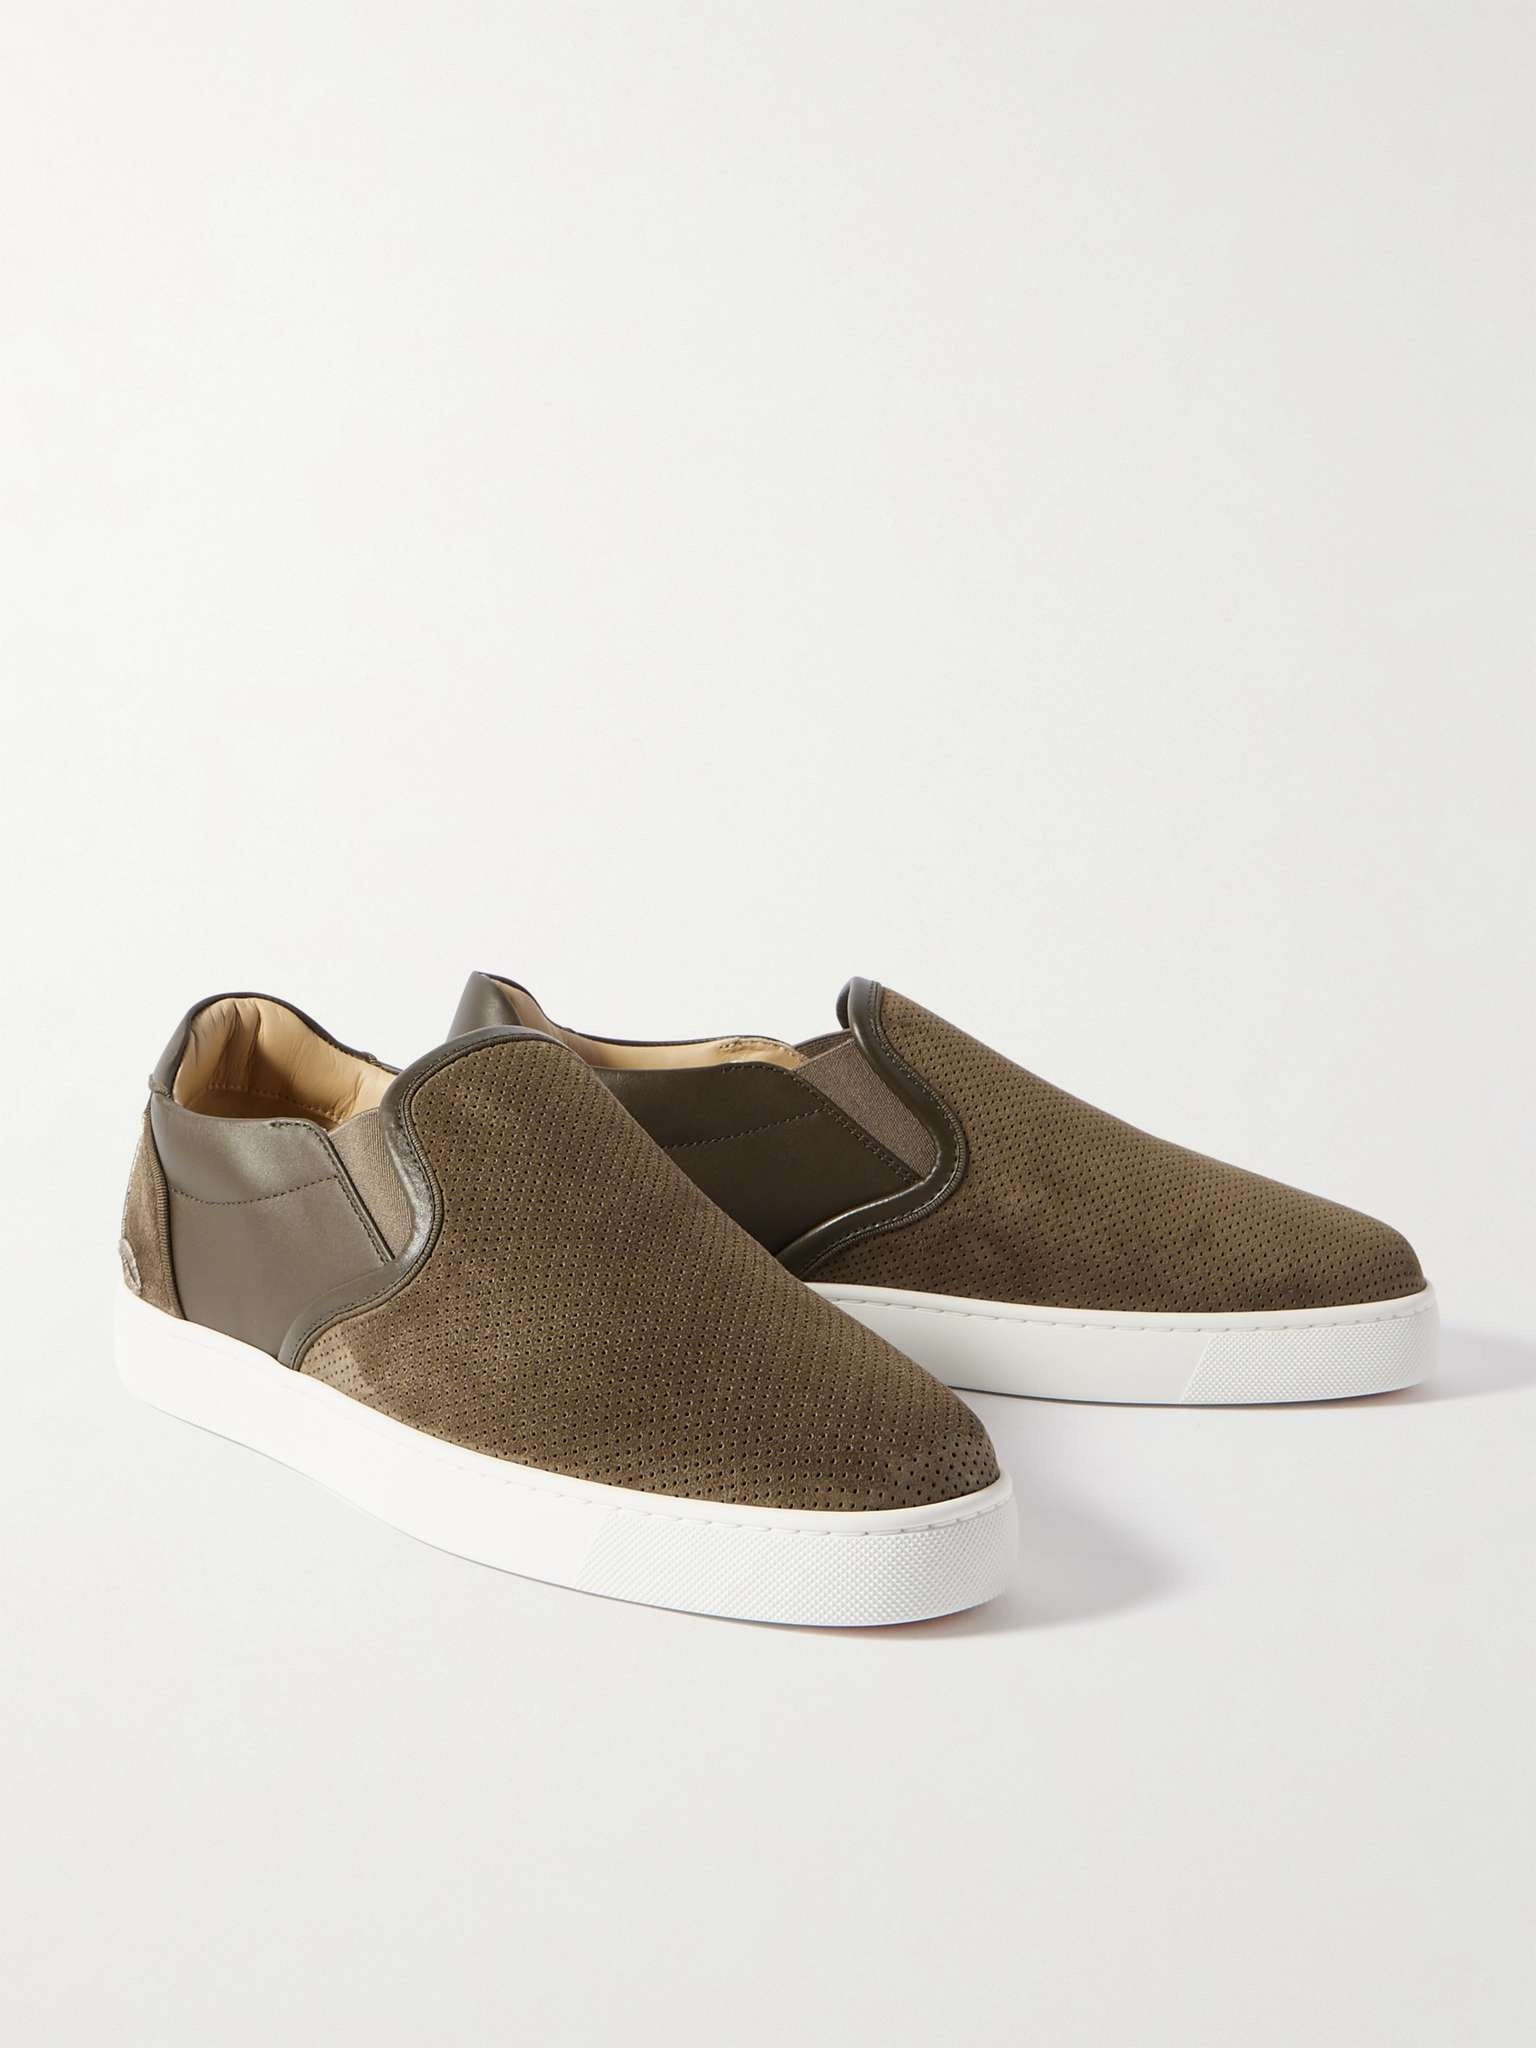 Fun Sailor Leather-Trimmed Perforated Suede Slip-On Sneakers - 4